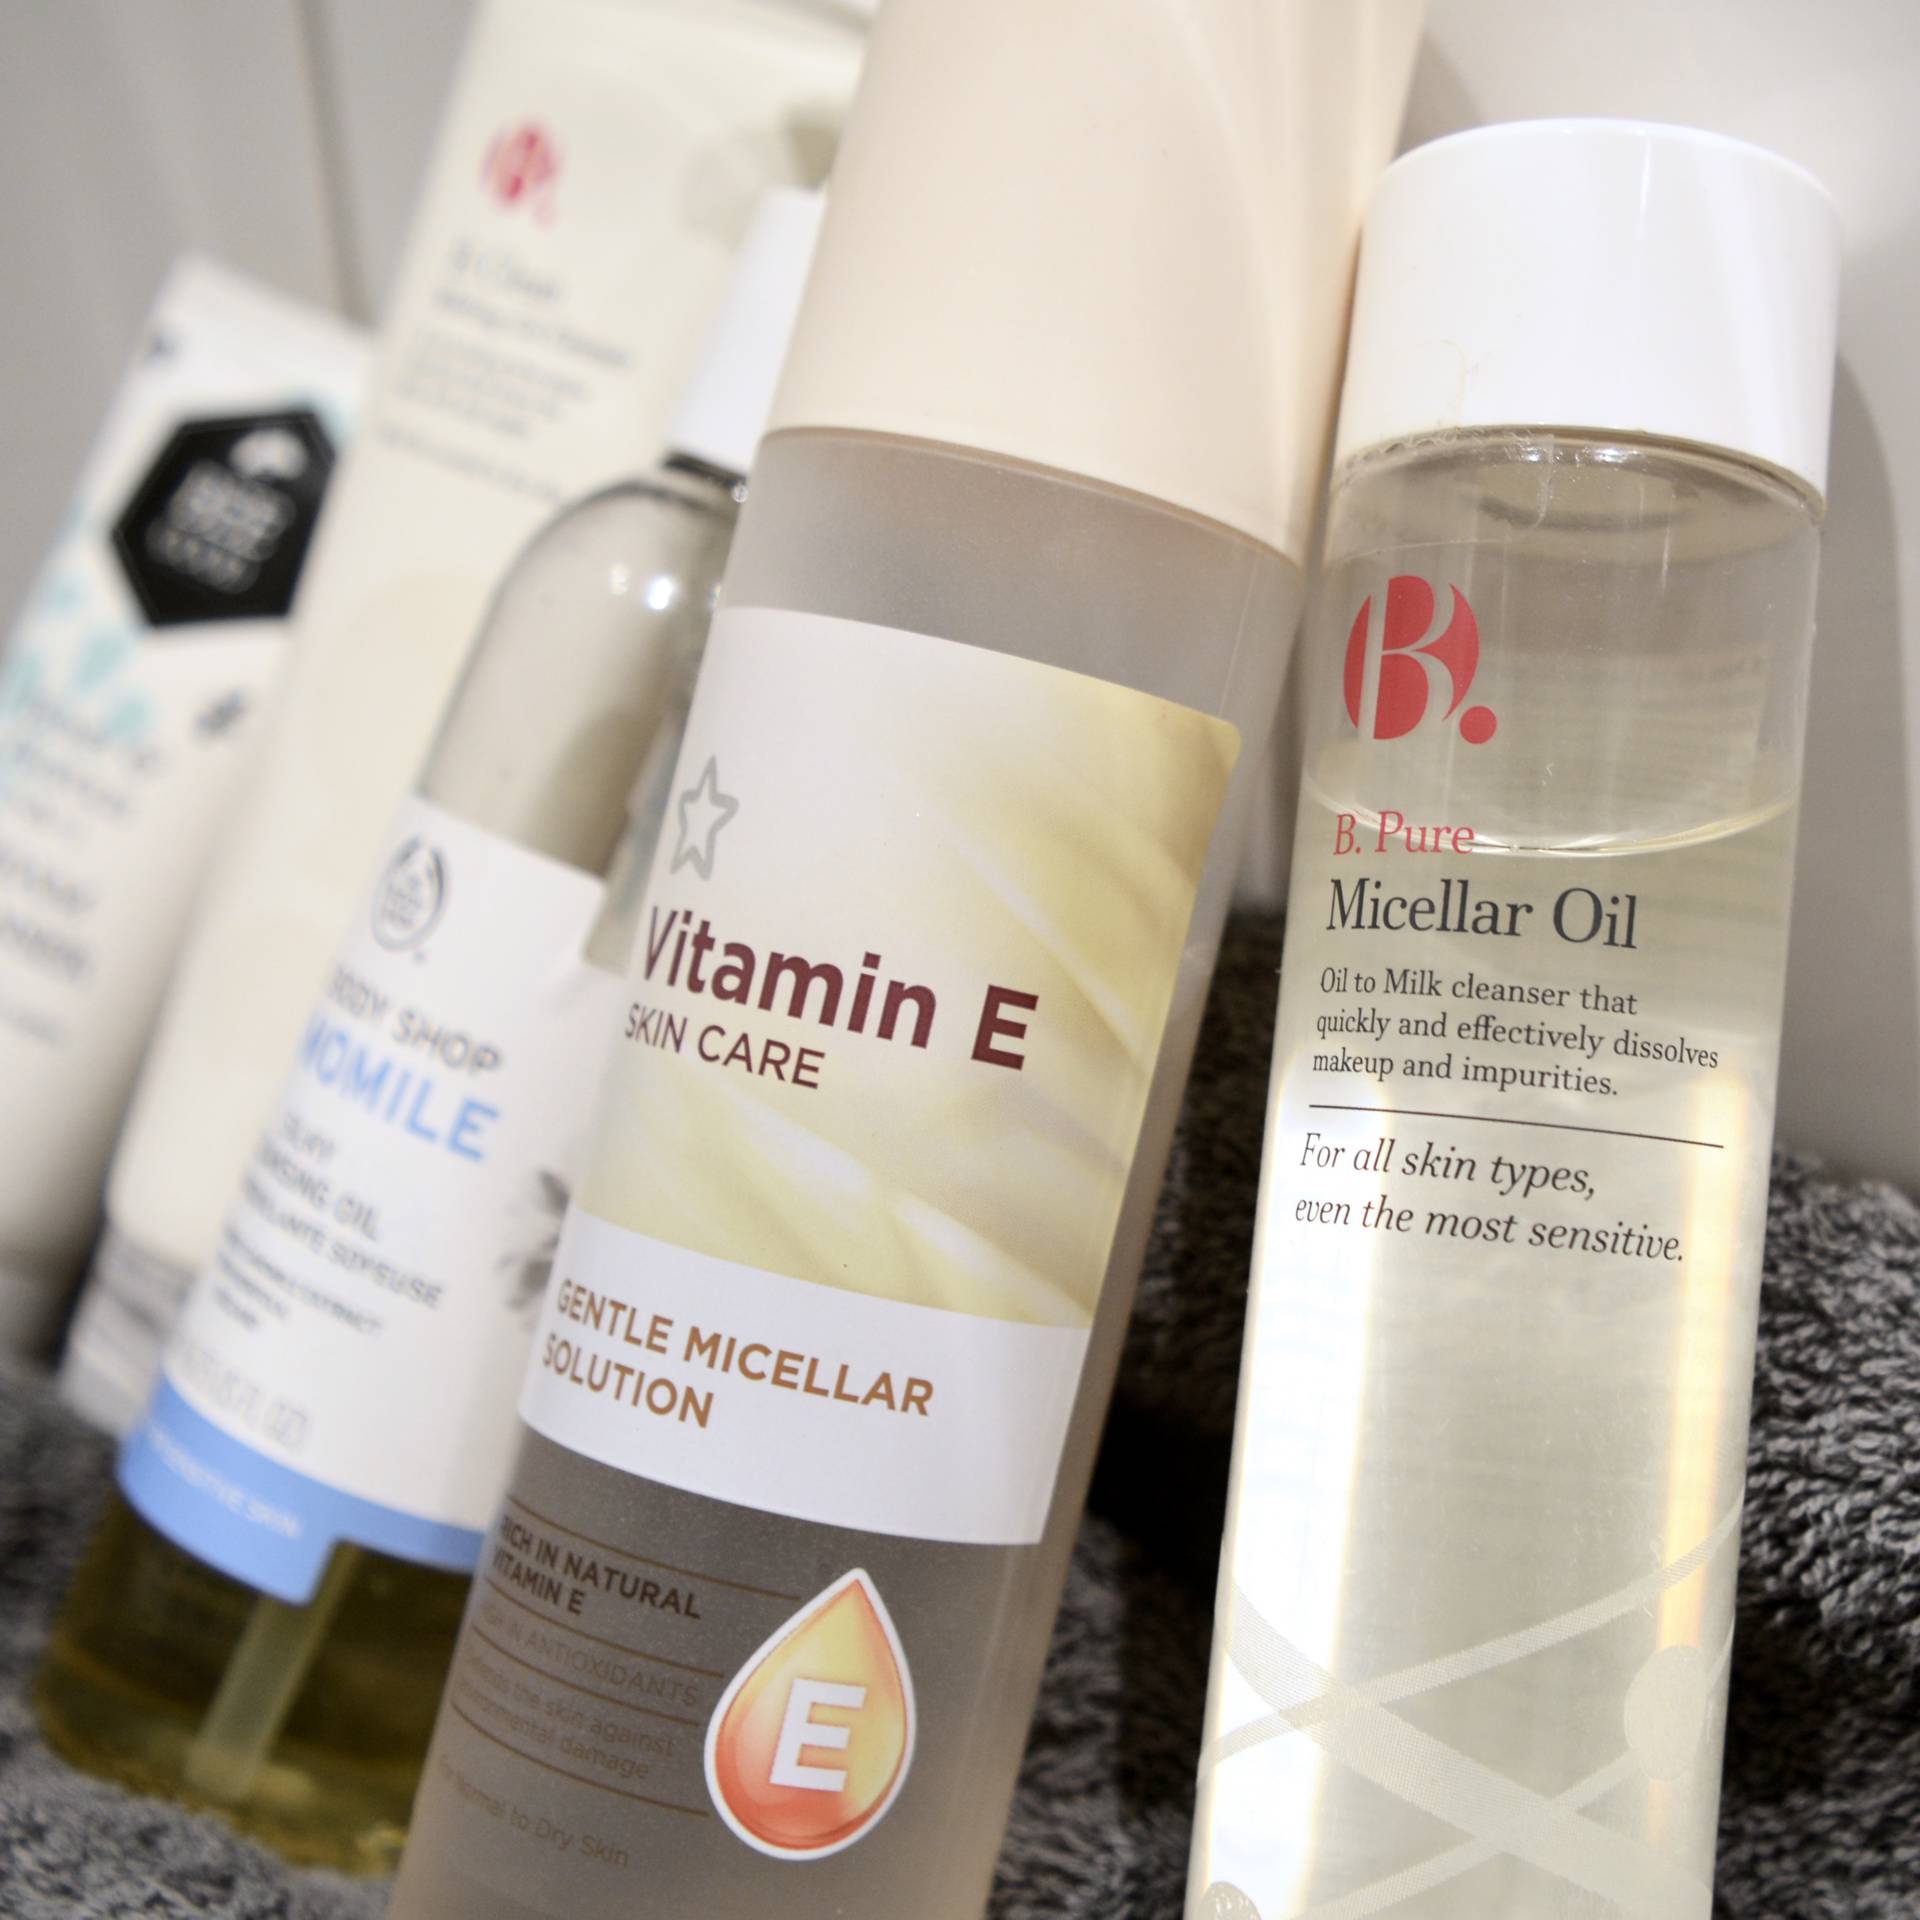 5 best budget cleansers for sensitive skin - B.Micellar Oil // Talonted Lex